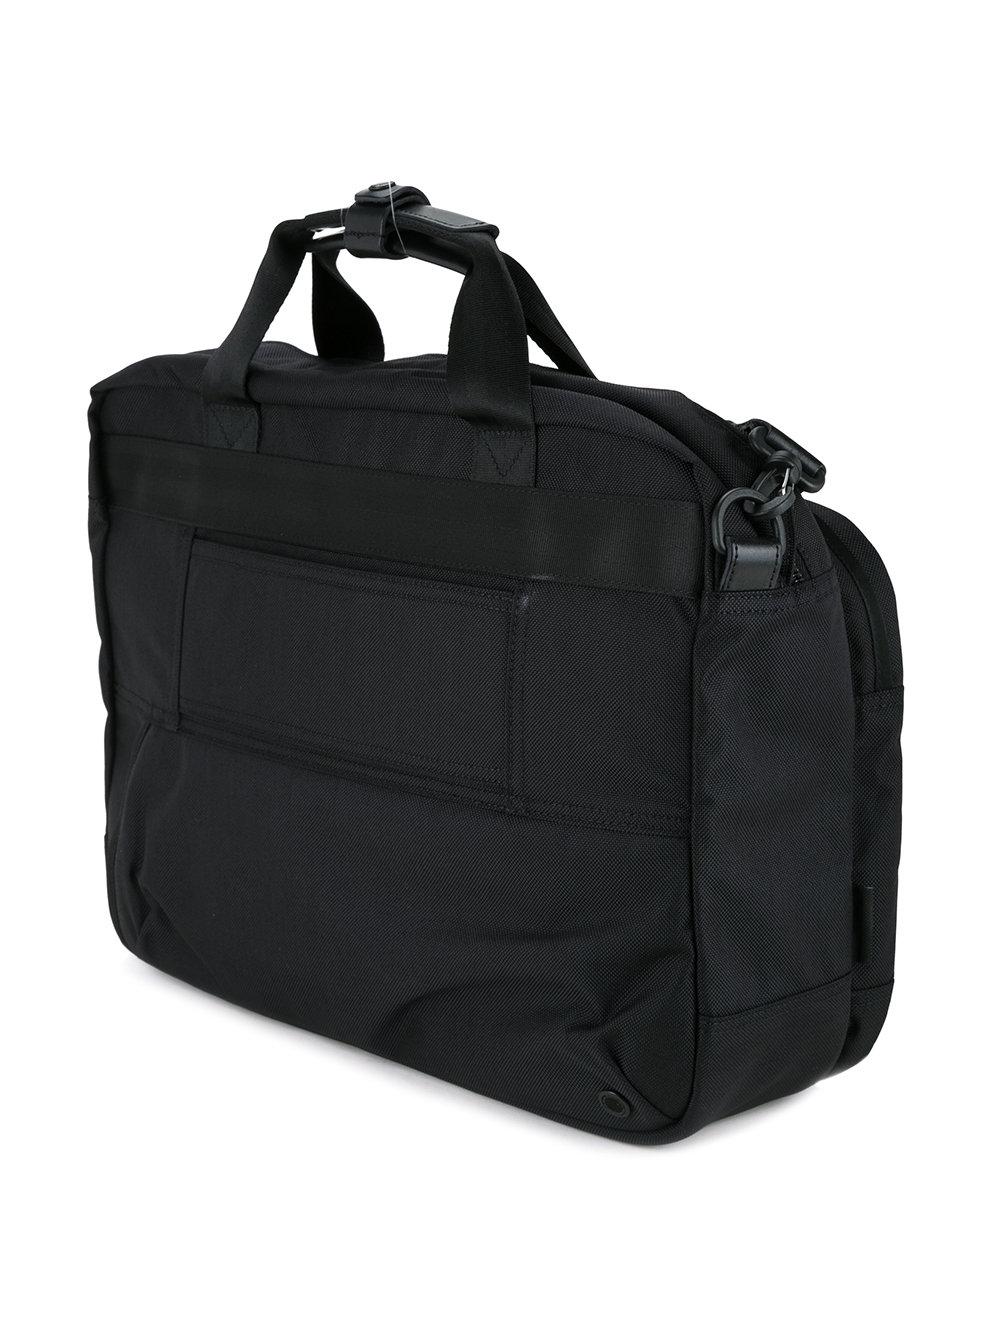 AS2OV Synthetic Utility Laptop Bag in Black for Men - Lyst